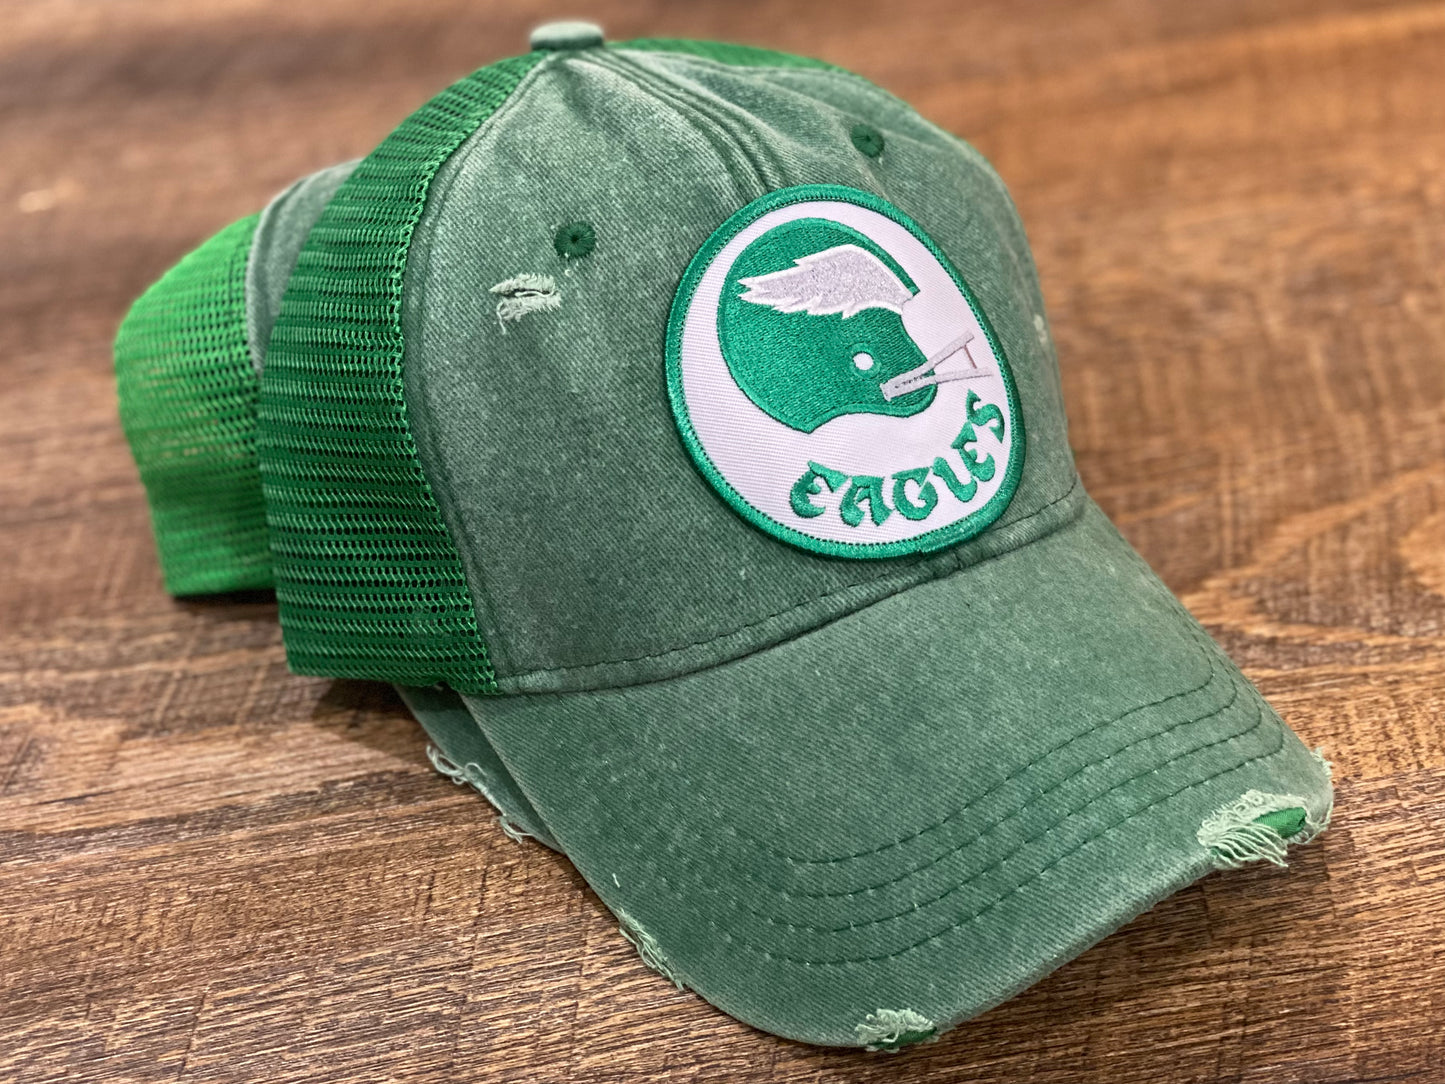 Distressed green trucker hat with patch